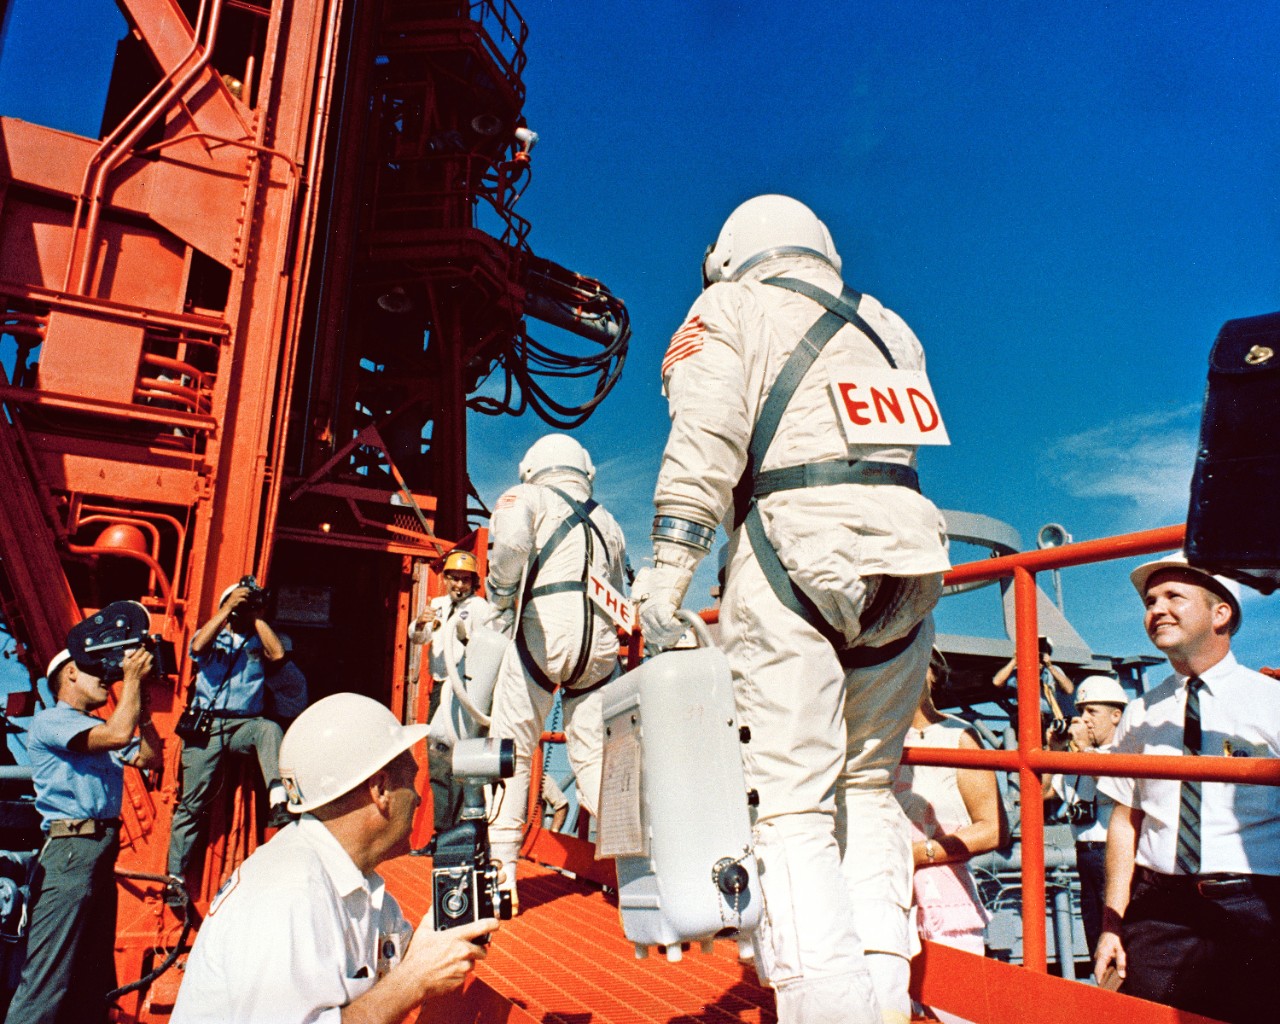 Gemini 12 Crew Arrive at Launch Complex 19, Cape Canaveral Air Force Station